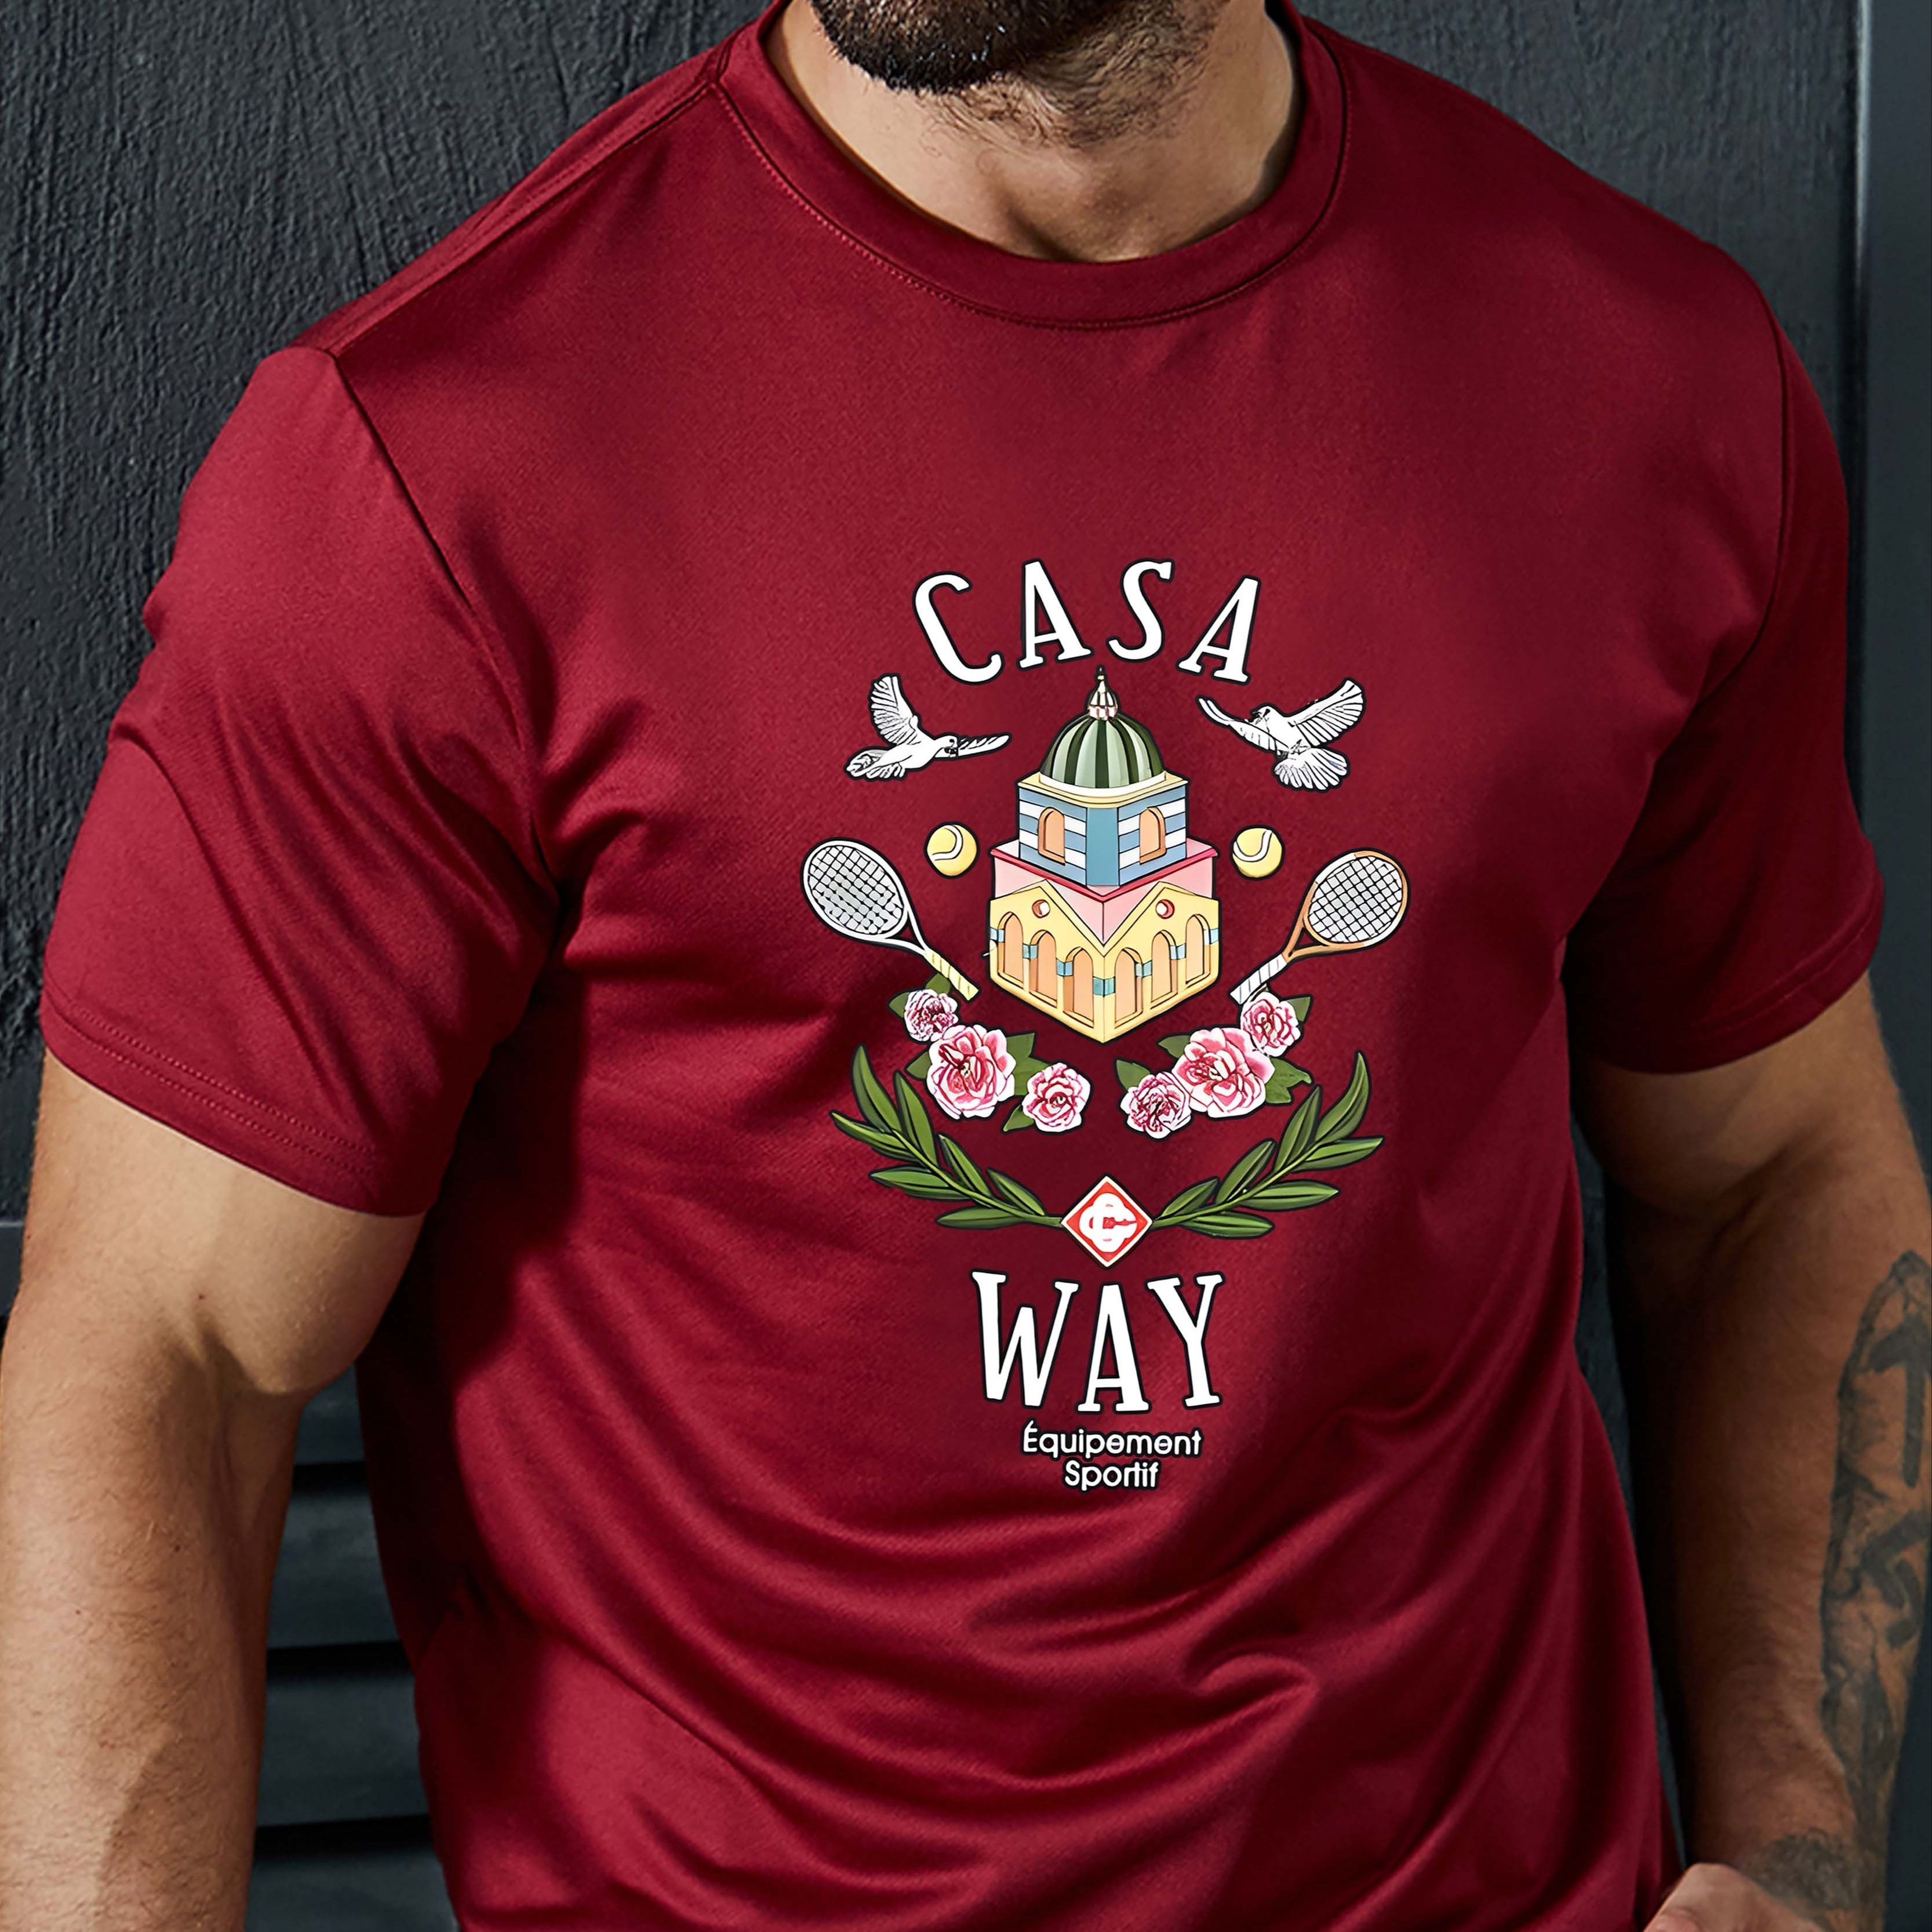 

' Casa Way 'creative Print Casual Novelty T-shirt For Men, Short Sleeve Summer& Spring Top, Comfort Fit, Stylish Streetwear Crew Neck Tee For Daily Wear